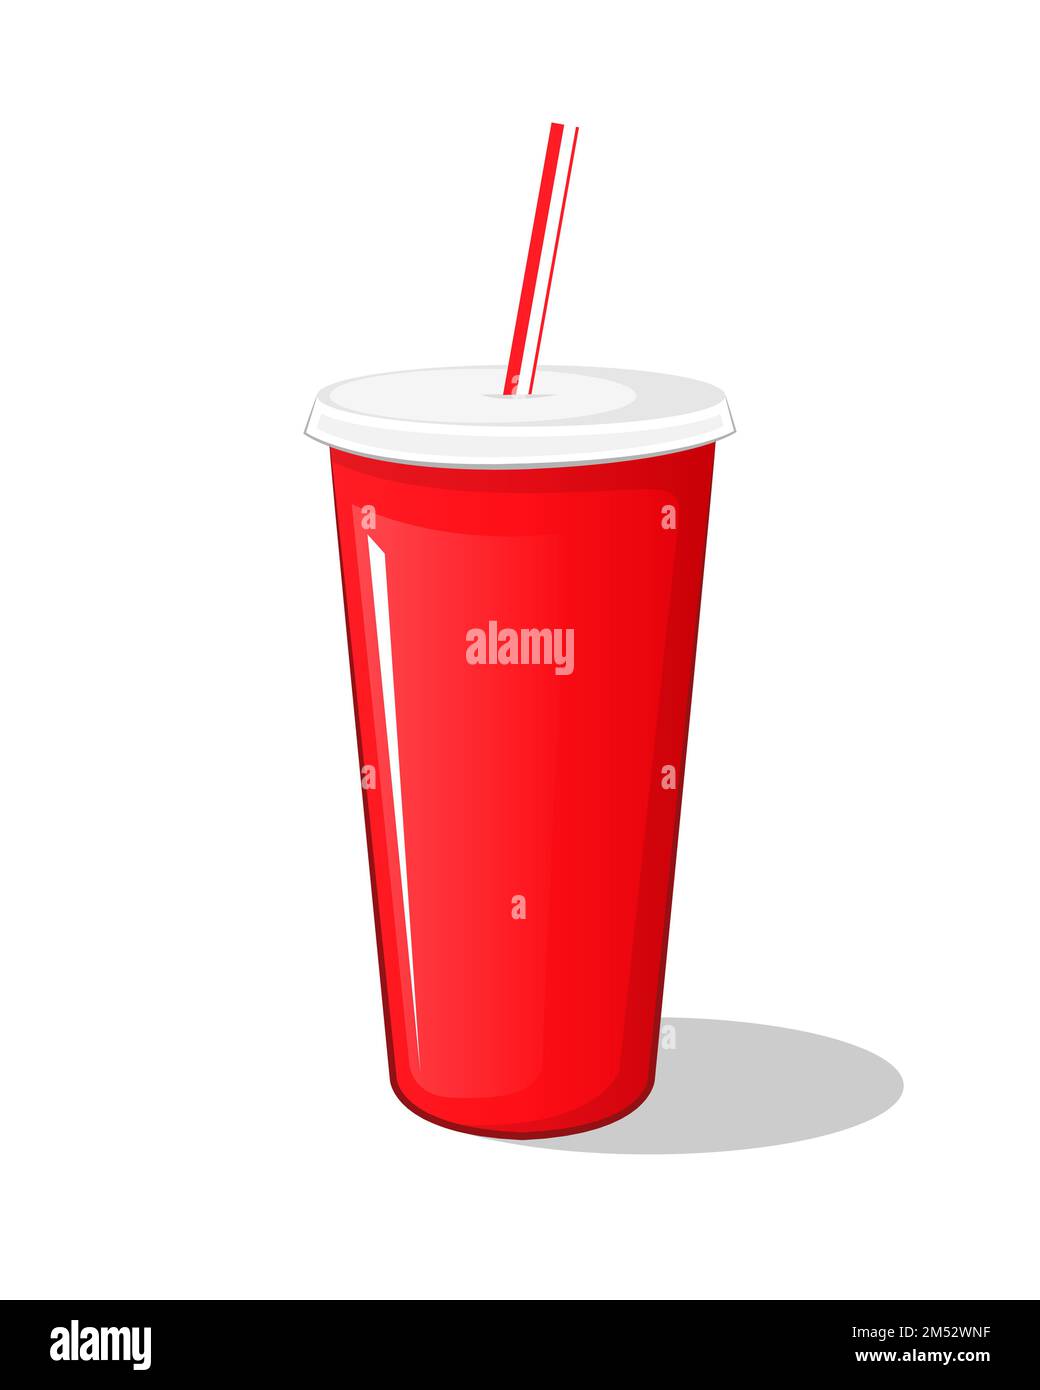 https://c8.alamy.com/comp/2M52WNF/cola-drink-in-a-red-plastic-pot-cardboard-cup-with-chopsticks-isolated-vector-illustration-on-a-white-background-carbonated-drink-packaged-sweet-symb-2M52WNF.jpg